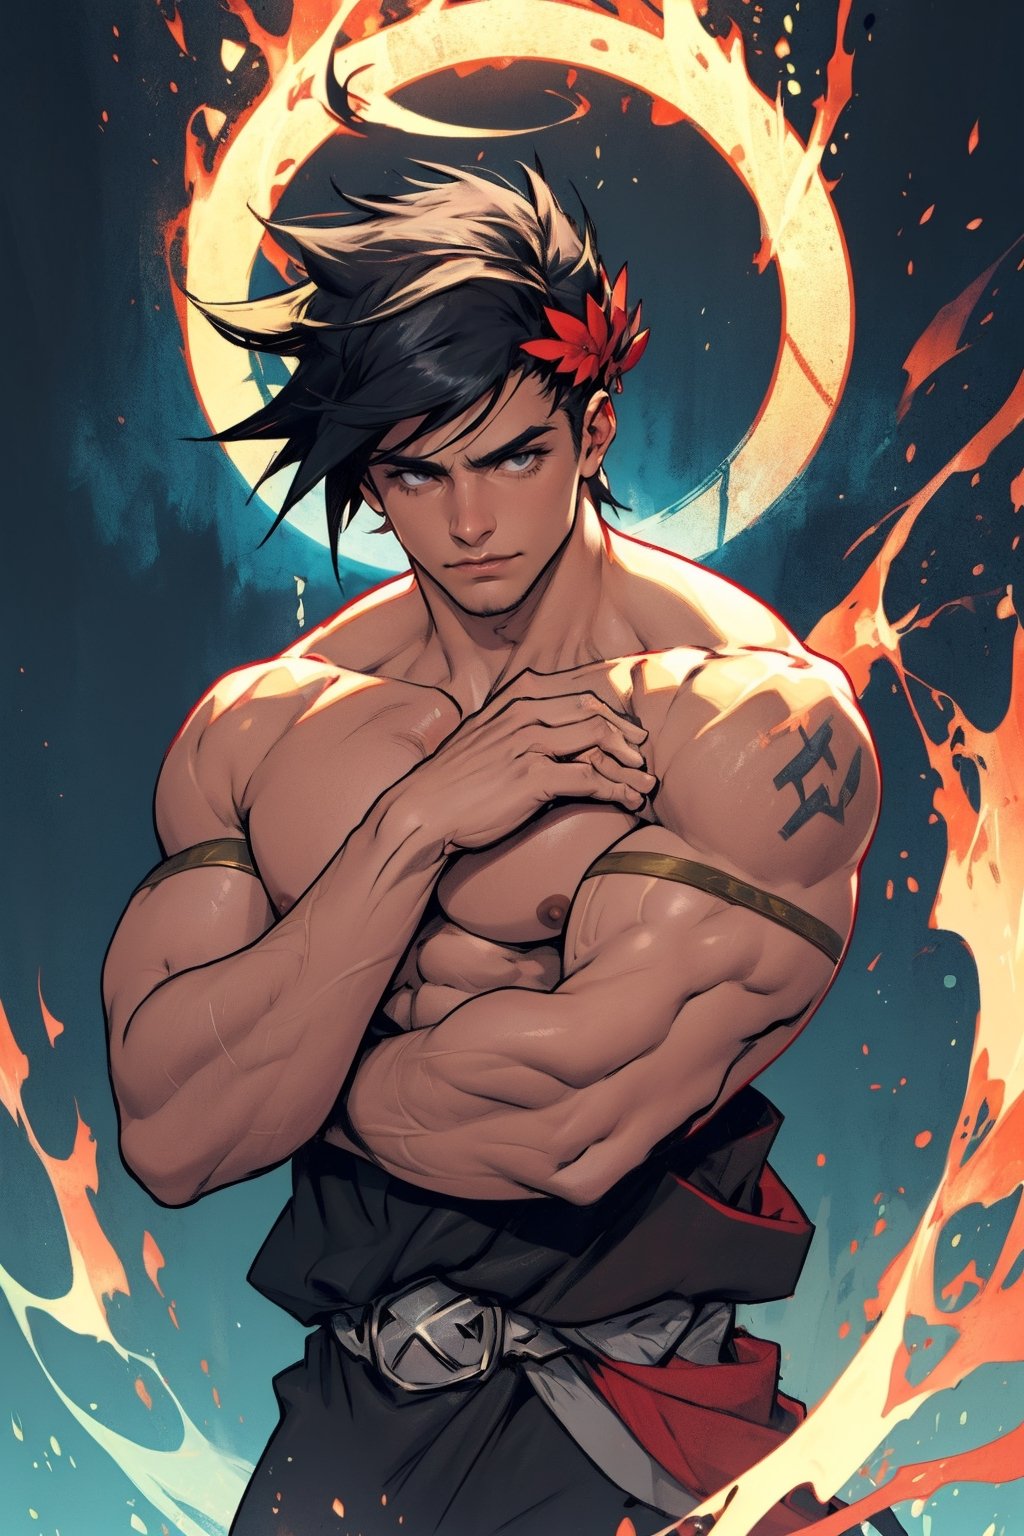 Zagreus showing his large muscular body without coverings on his chest, arms and shoulders 